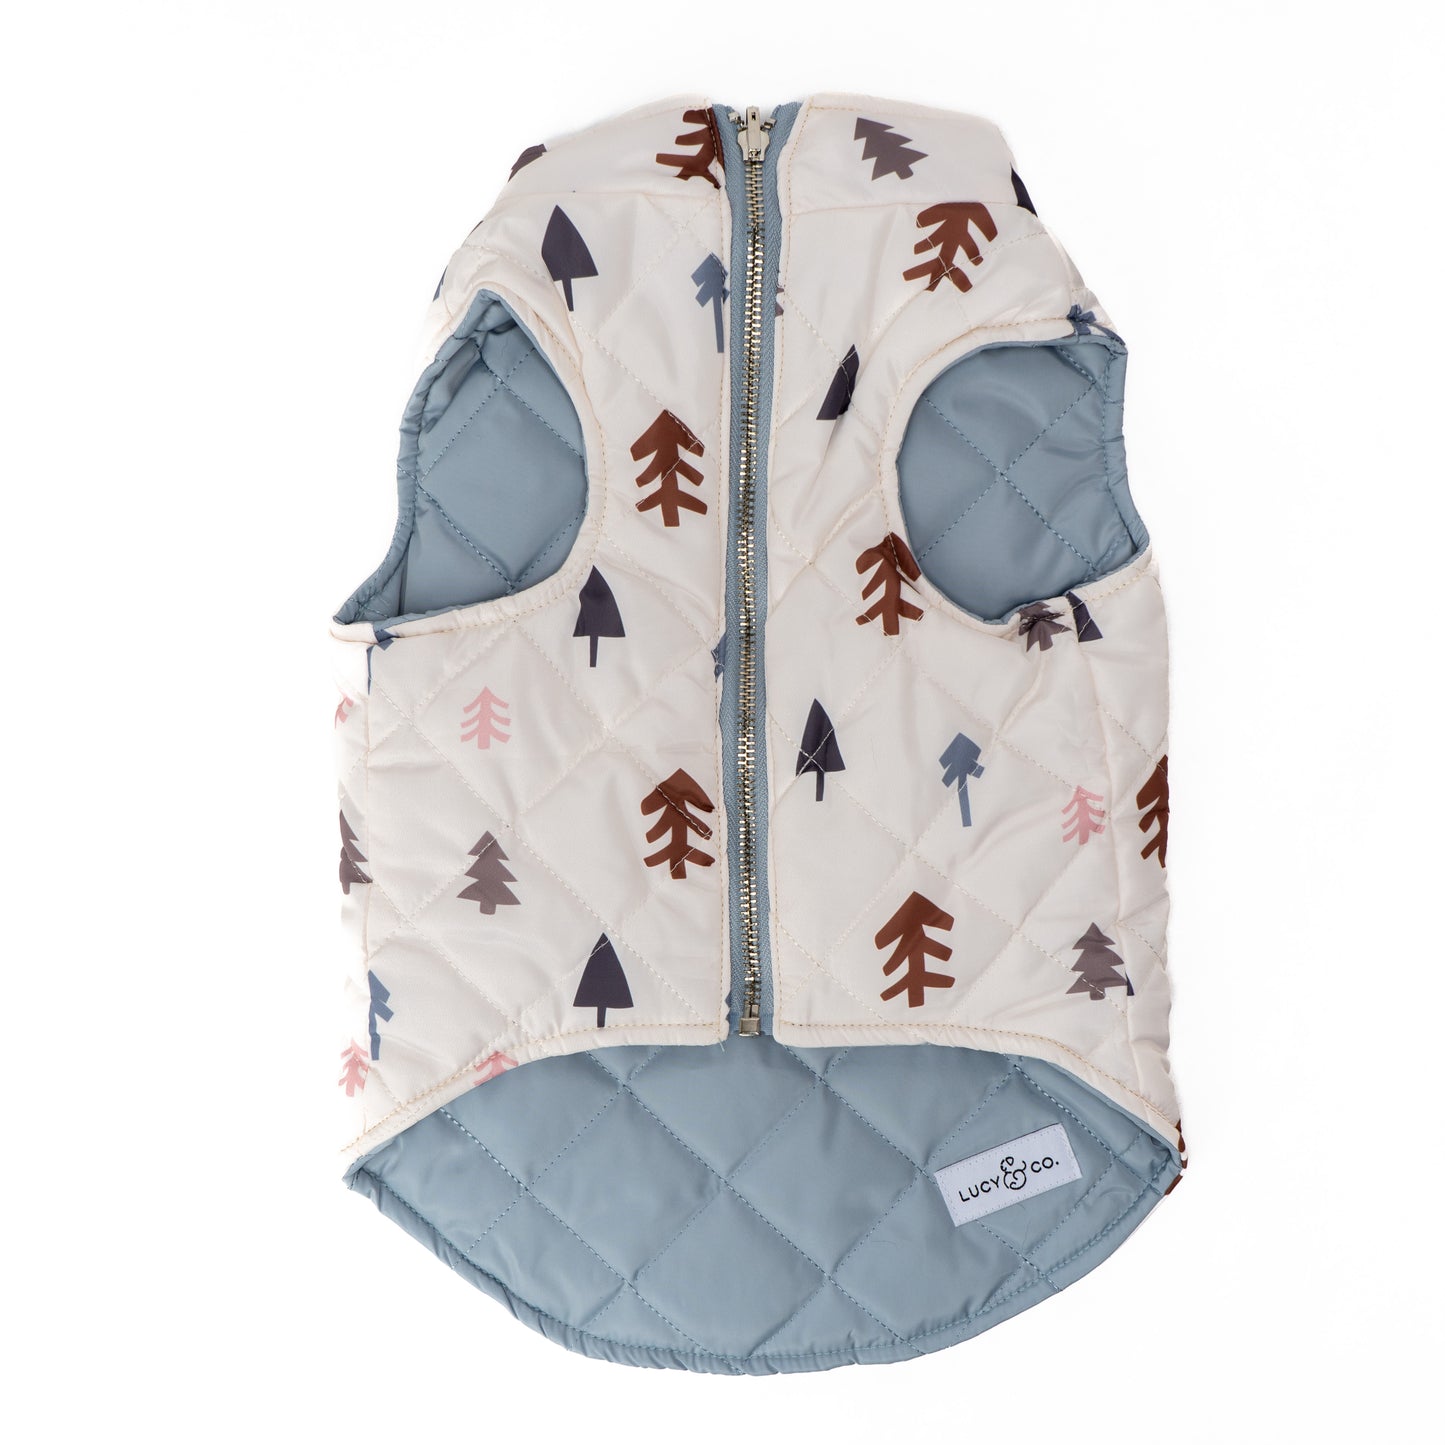 The Flurried Forest Reversible Puffer Vest